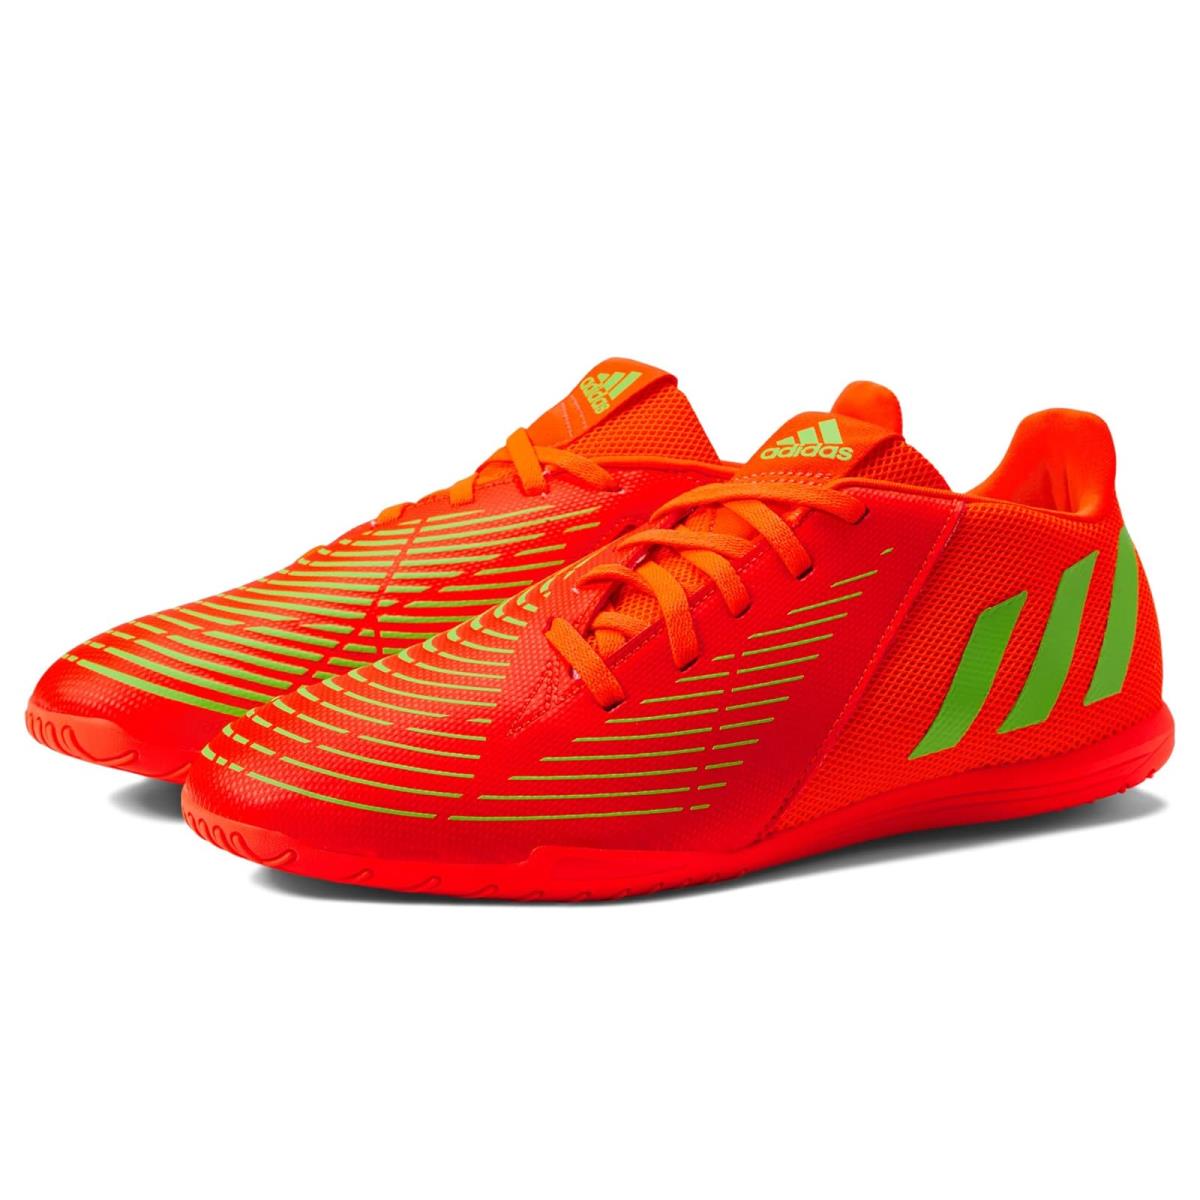 Adidas shoes  - Red 0